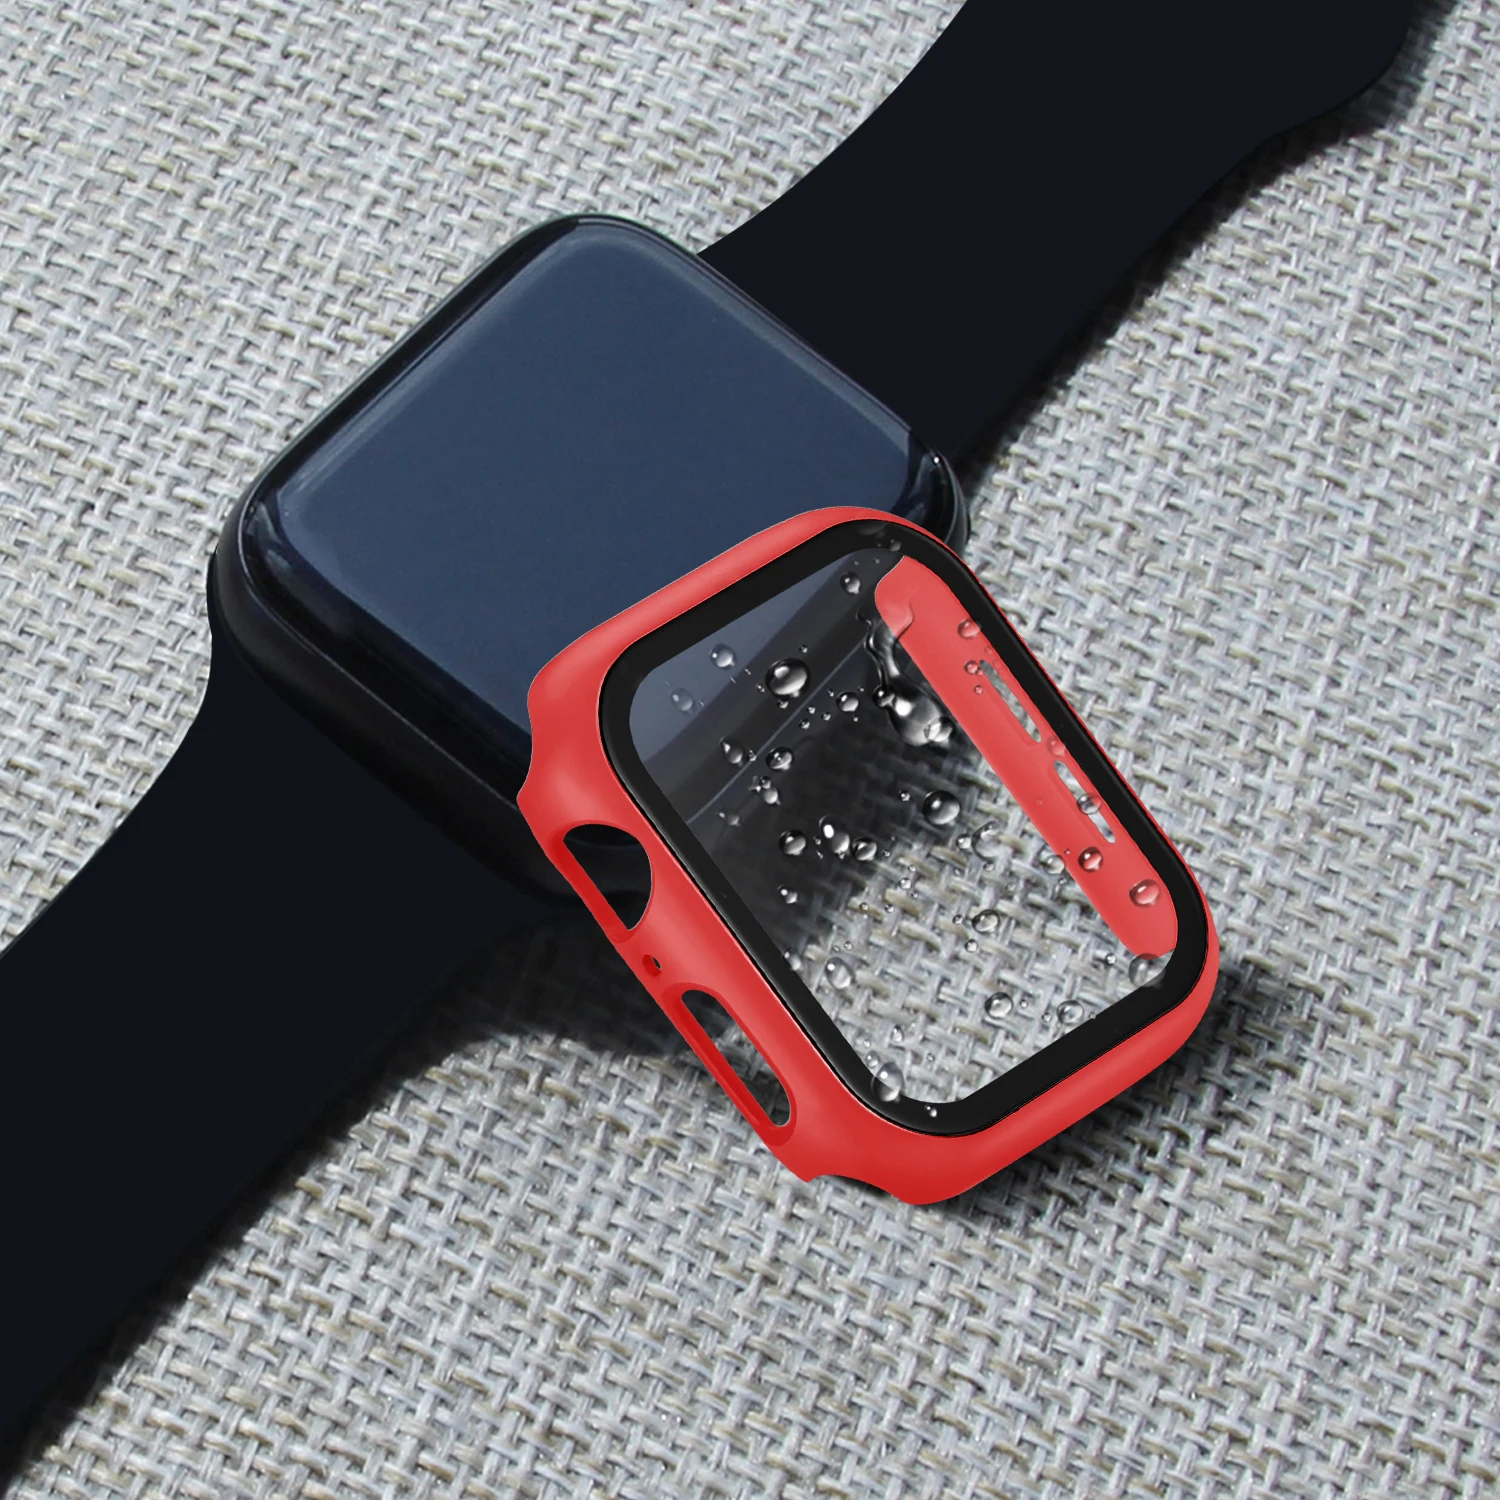 Protector watch Case For Apple Watch 5 4 40mm 44mm PC Cover+tempered film integrated molding For Iwatch Screen Protector Bumper